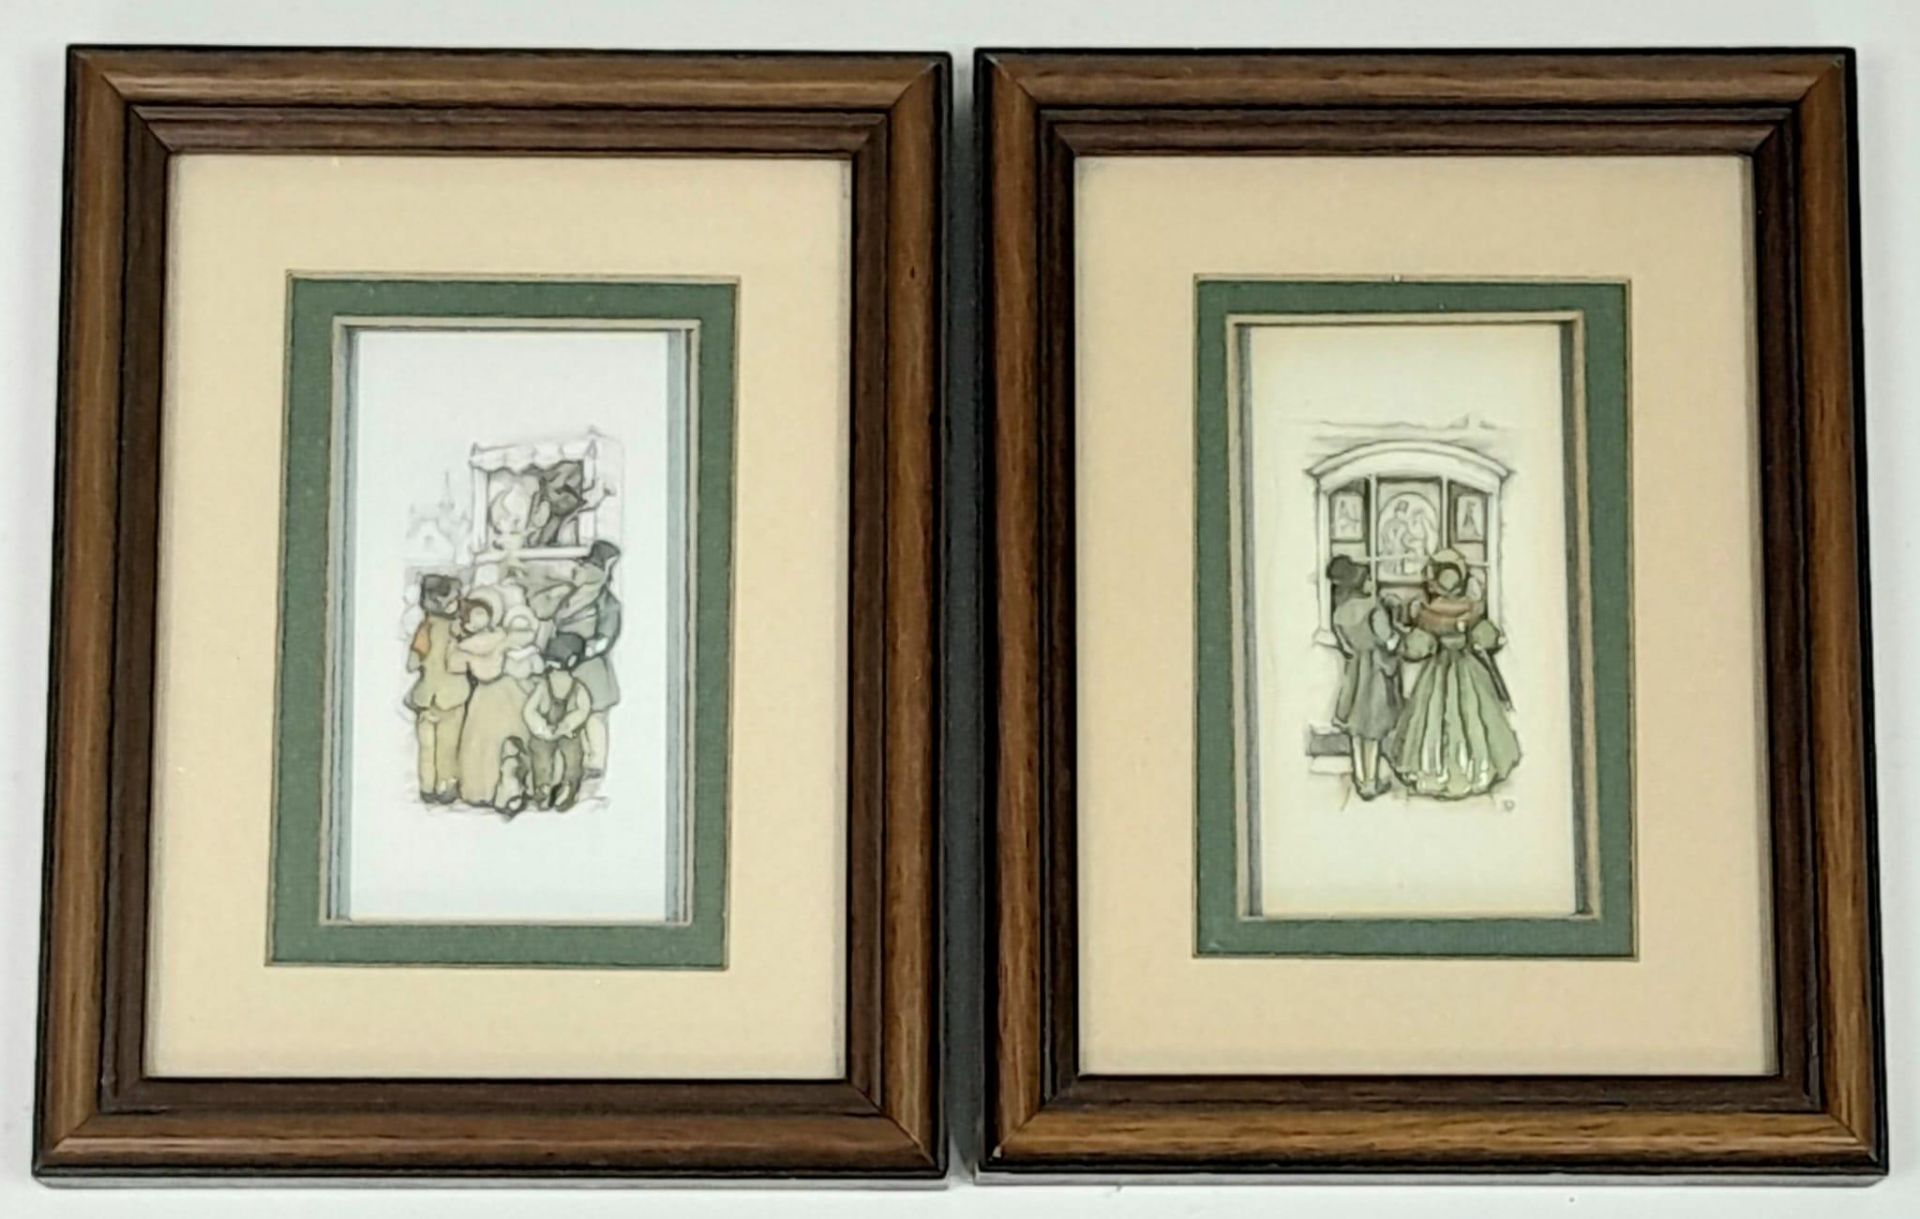 Pair of 'Living Pictures' created by Joh Ellam. Nicely framed and a unique look about them. Measures